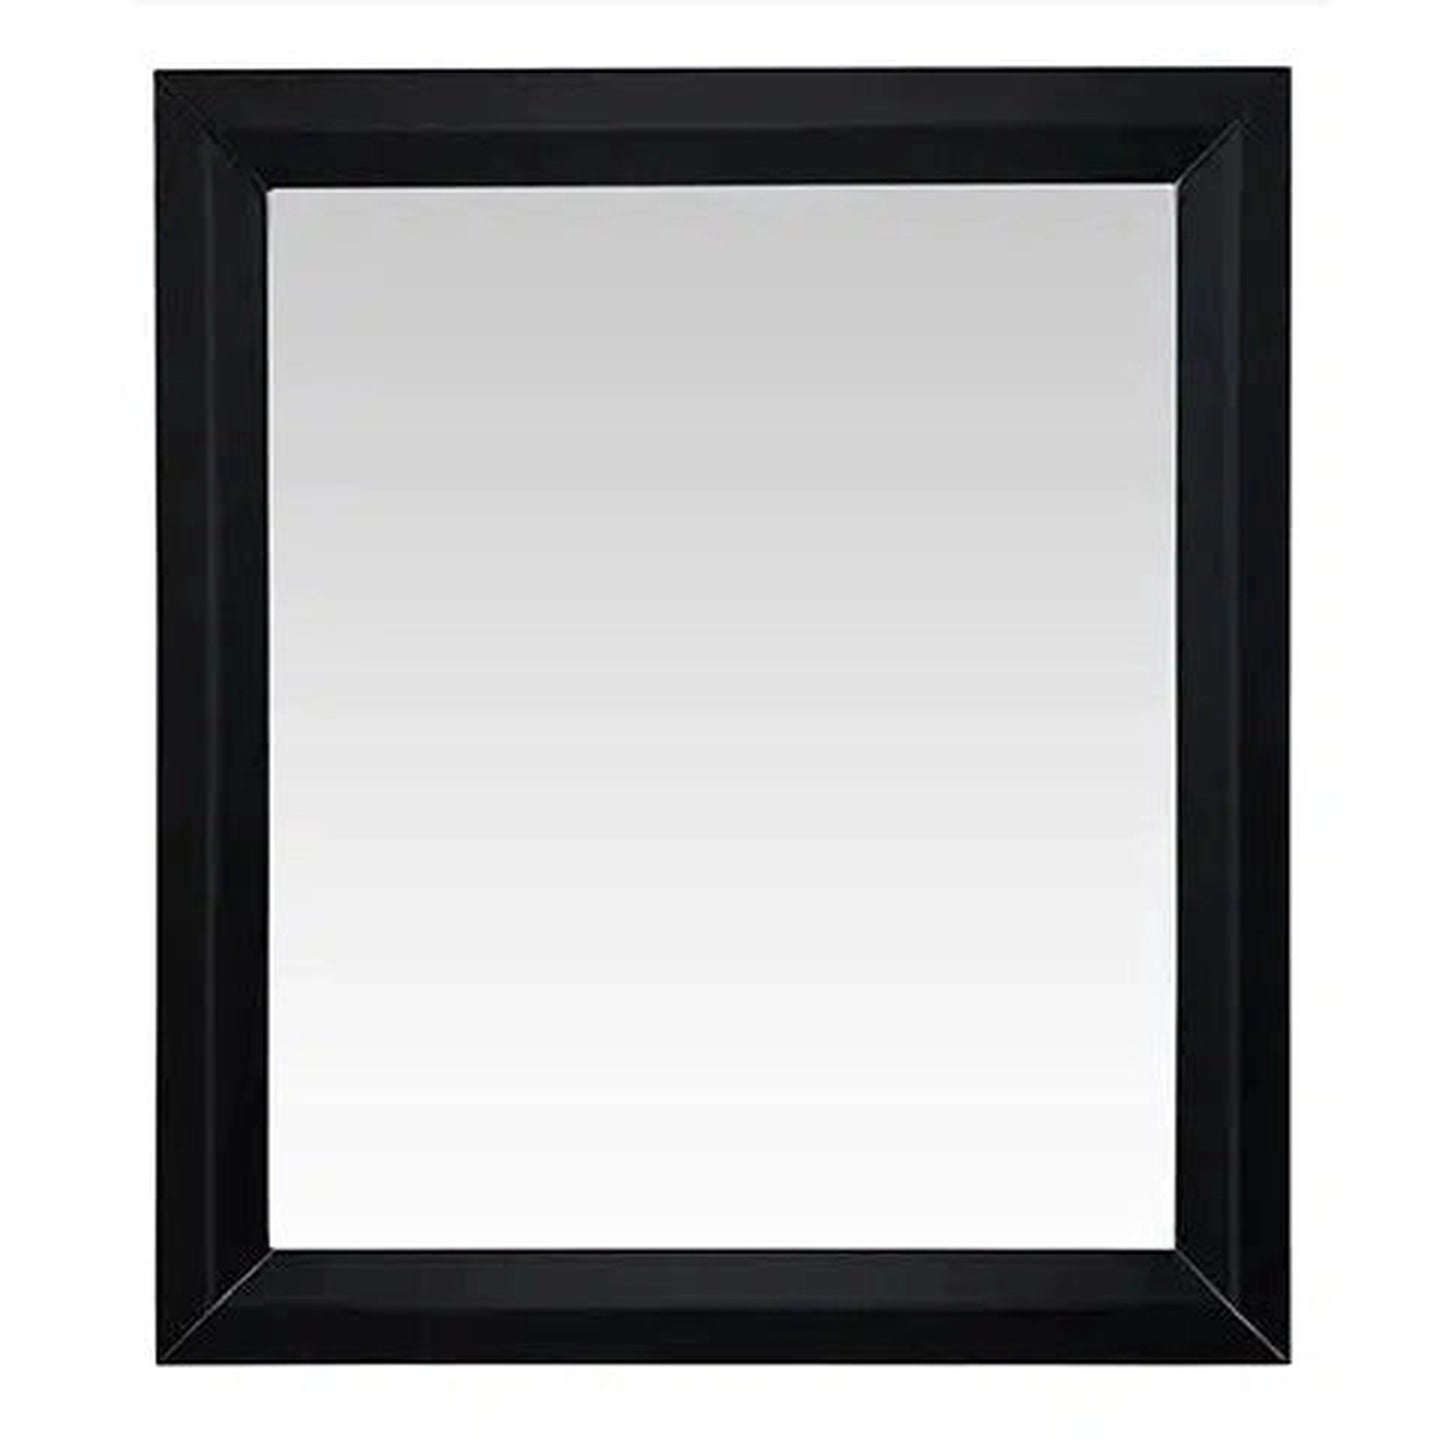 Ancerre Designs 28" x 32" Rectangle Black Onyx Solid Wood Framed Bathroom Vanity Mirror With Mounting Hardware